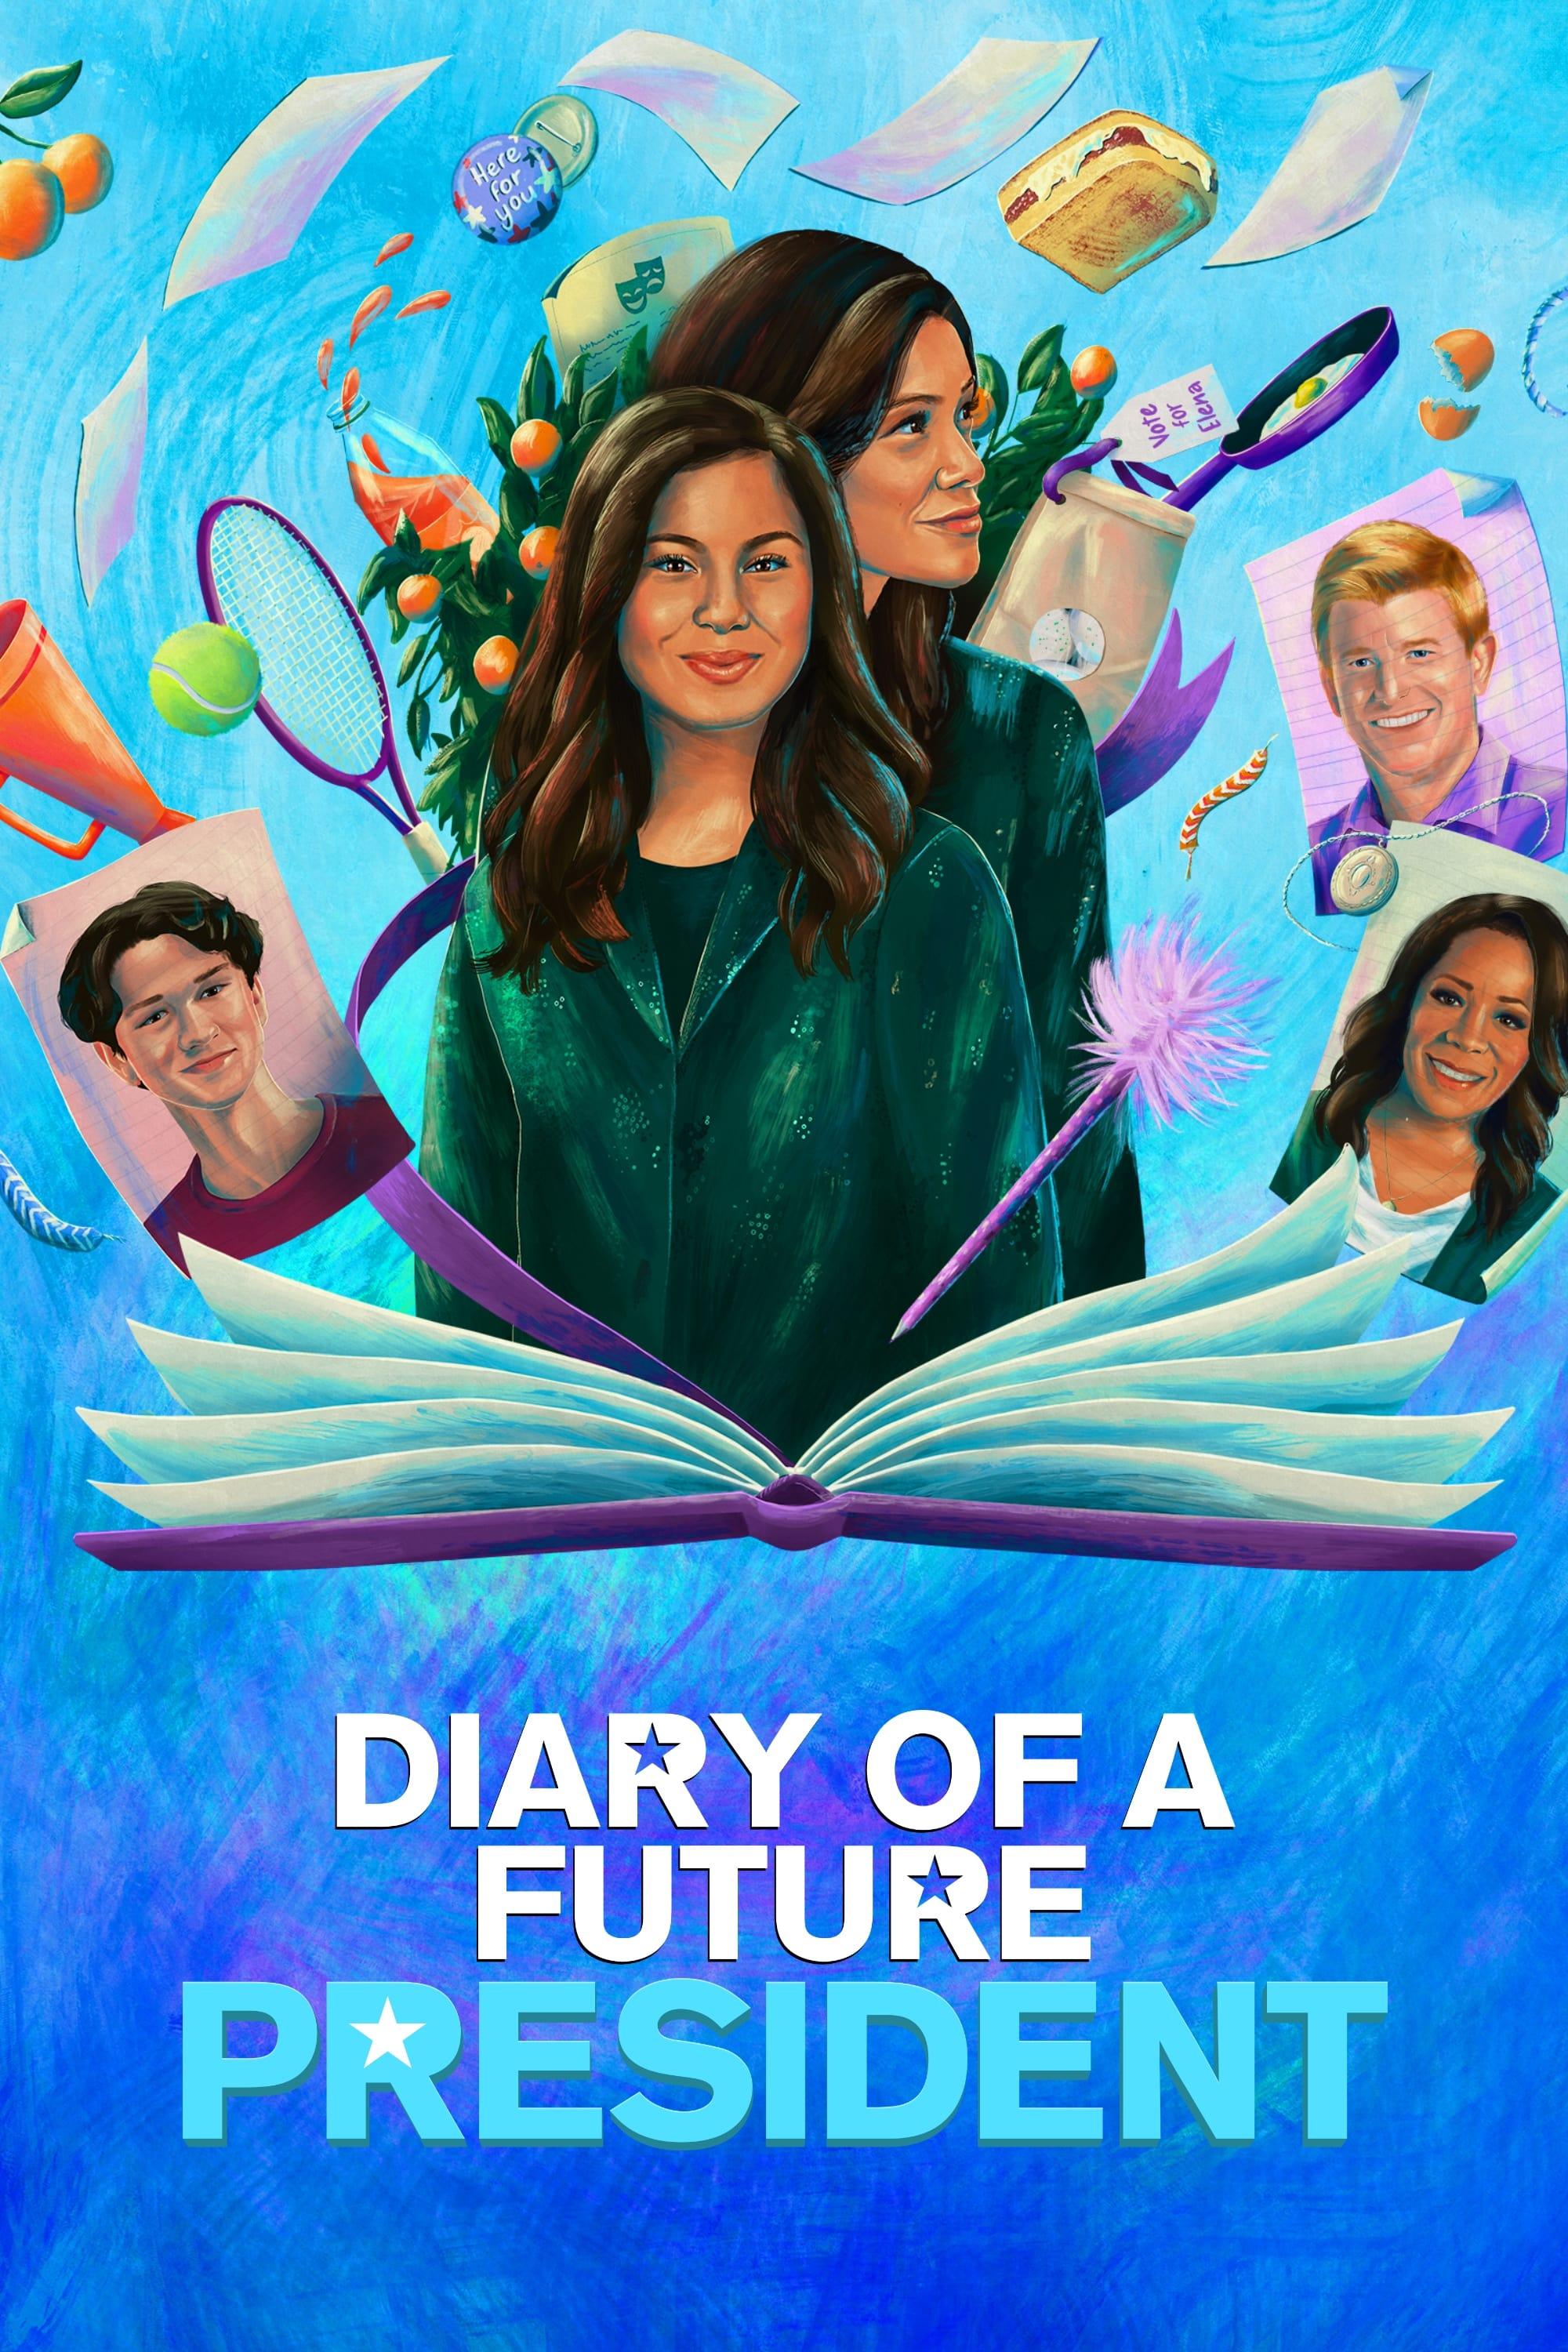 Diary of a Future President poster